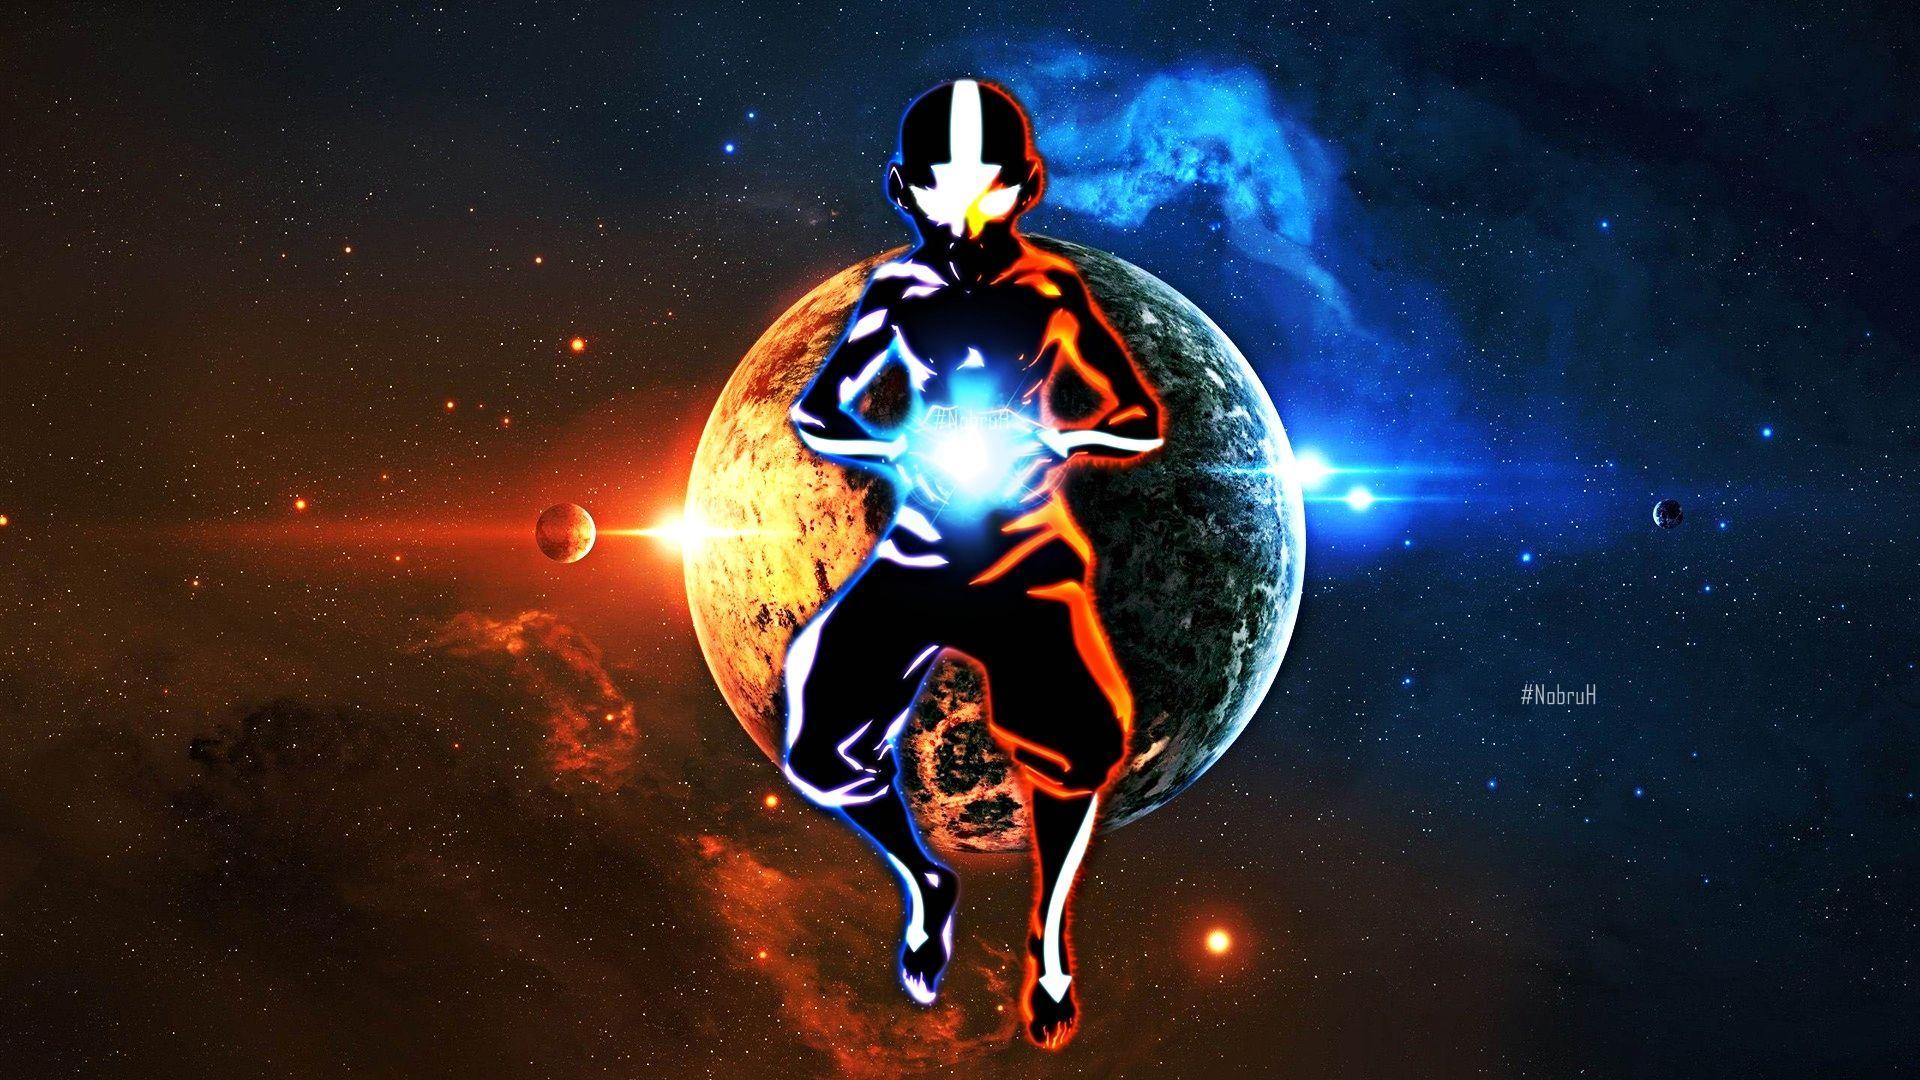 image For > Avatar The Last Airbender Wallpaper Aang. Avatar